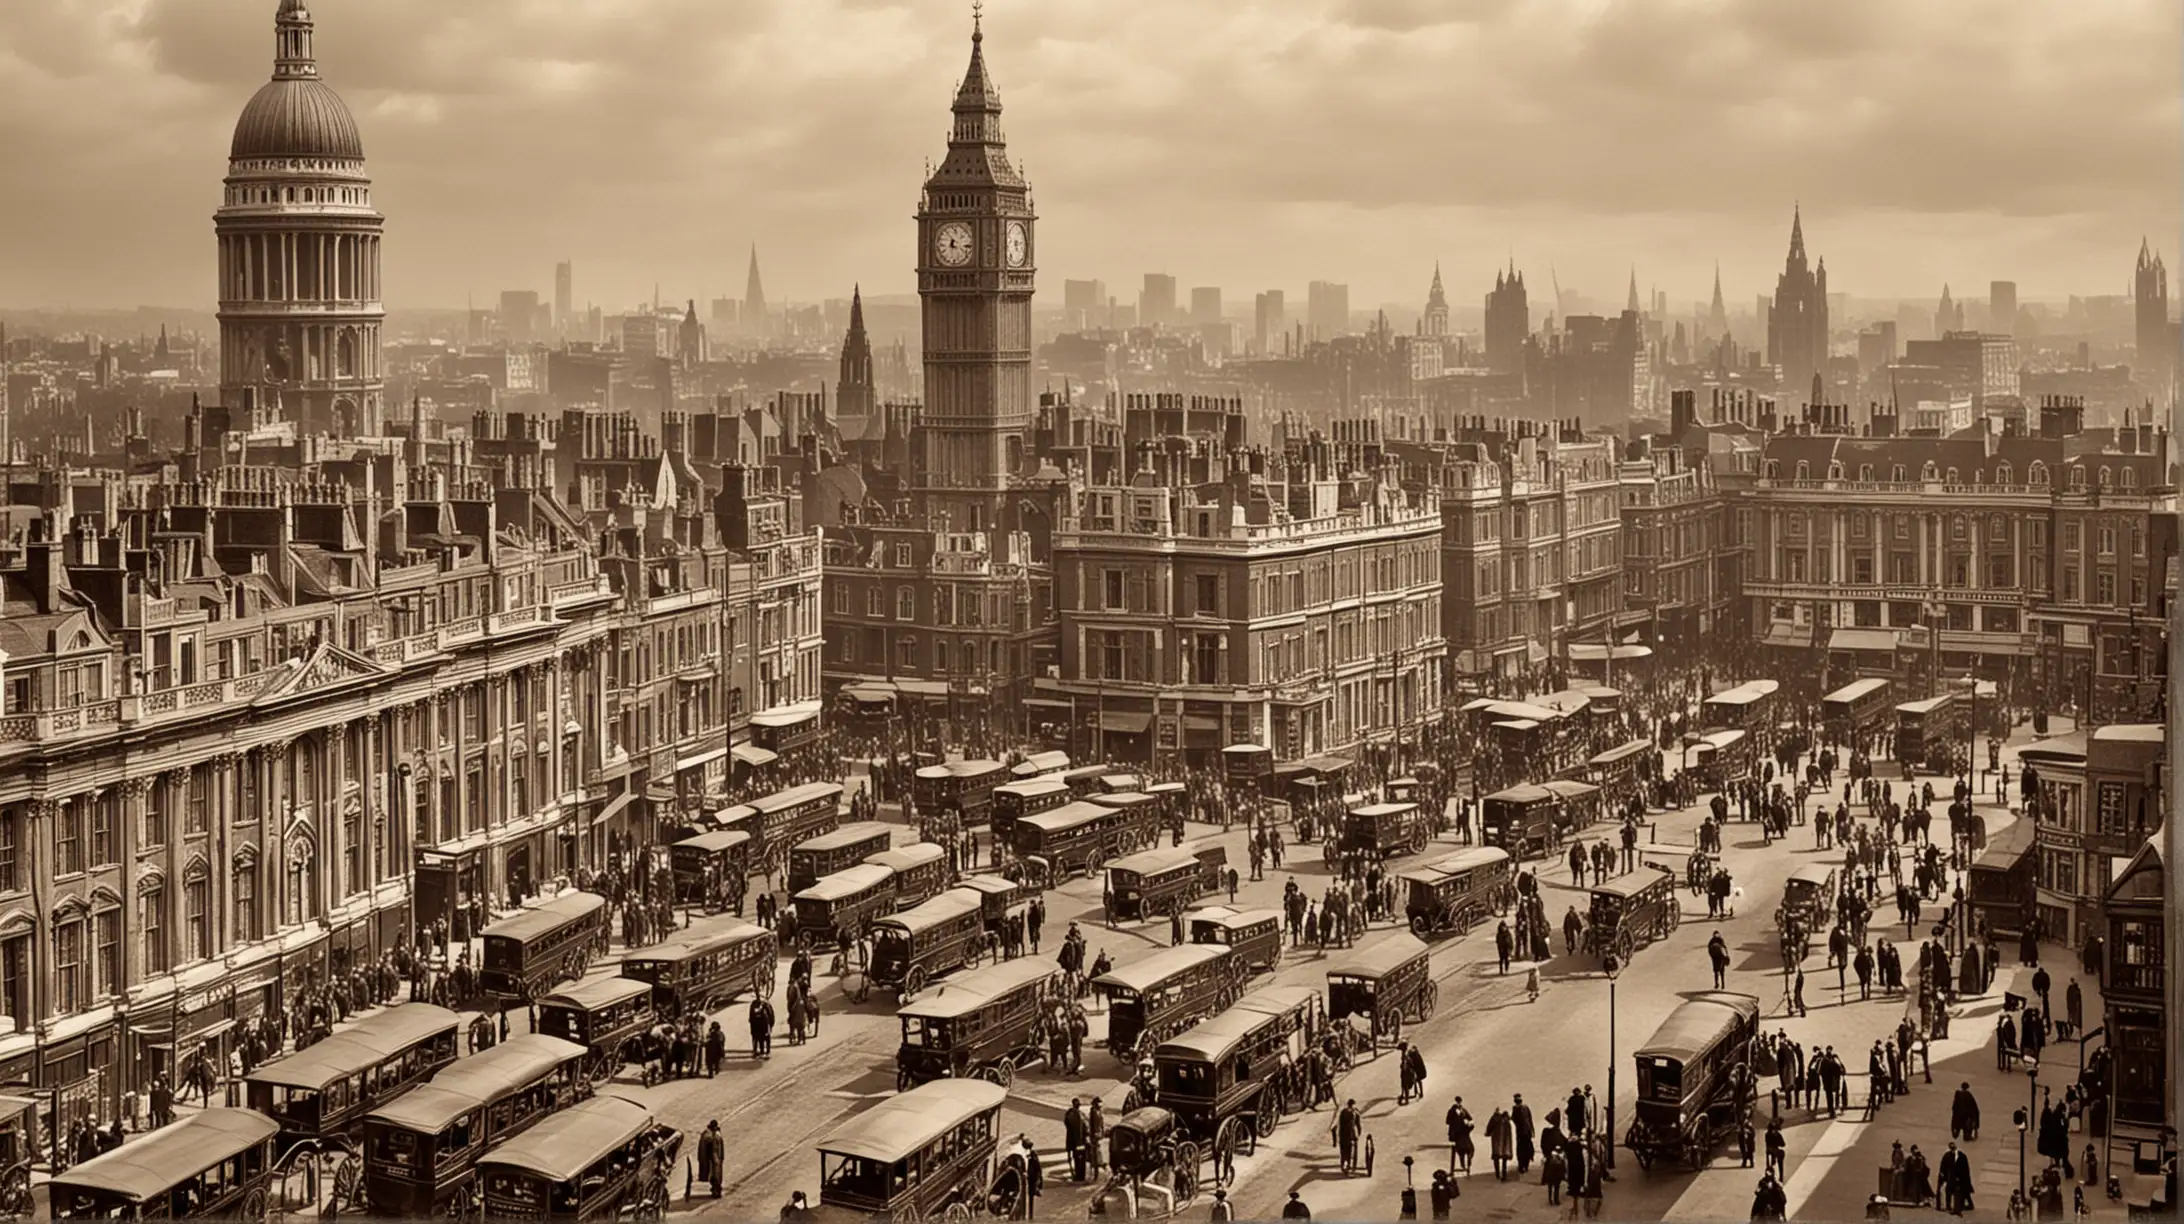 London in victorian times